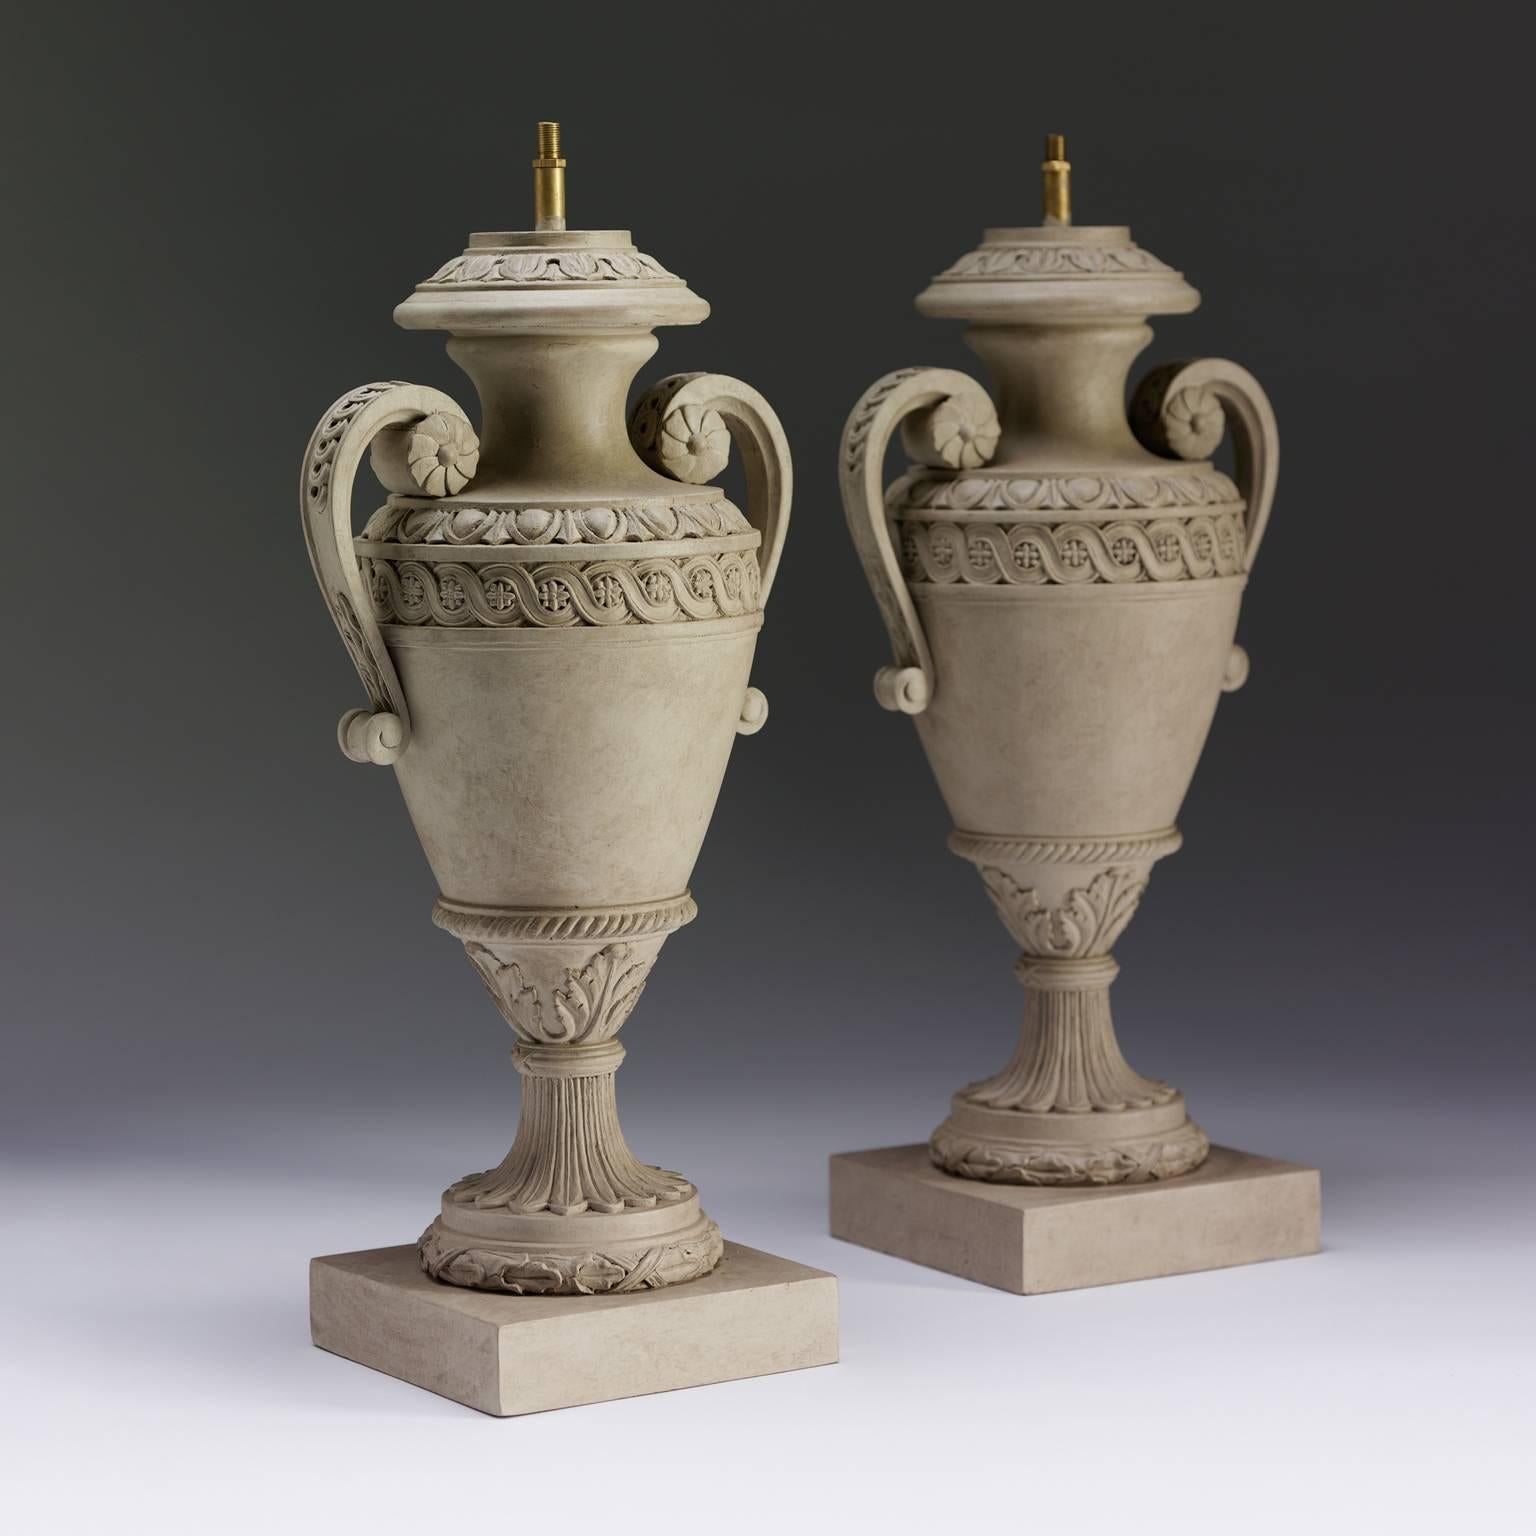 A fine pair of carved and painted Robert Adam inspired table lamps with guilloche and egg and dart decoration, on square platform bases.

We are currently working to a 30-36 week lead time.